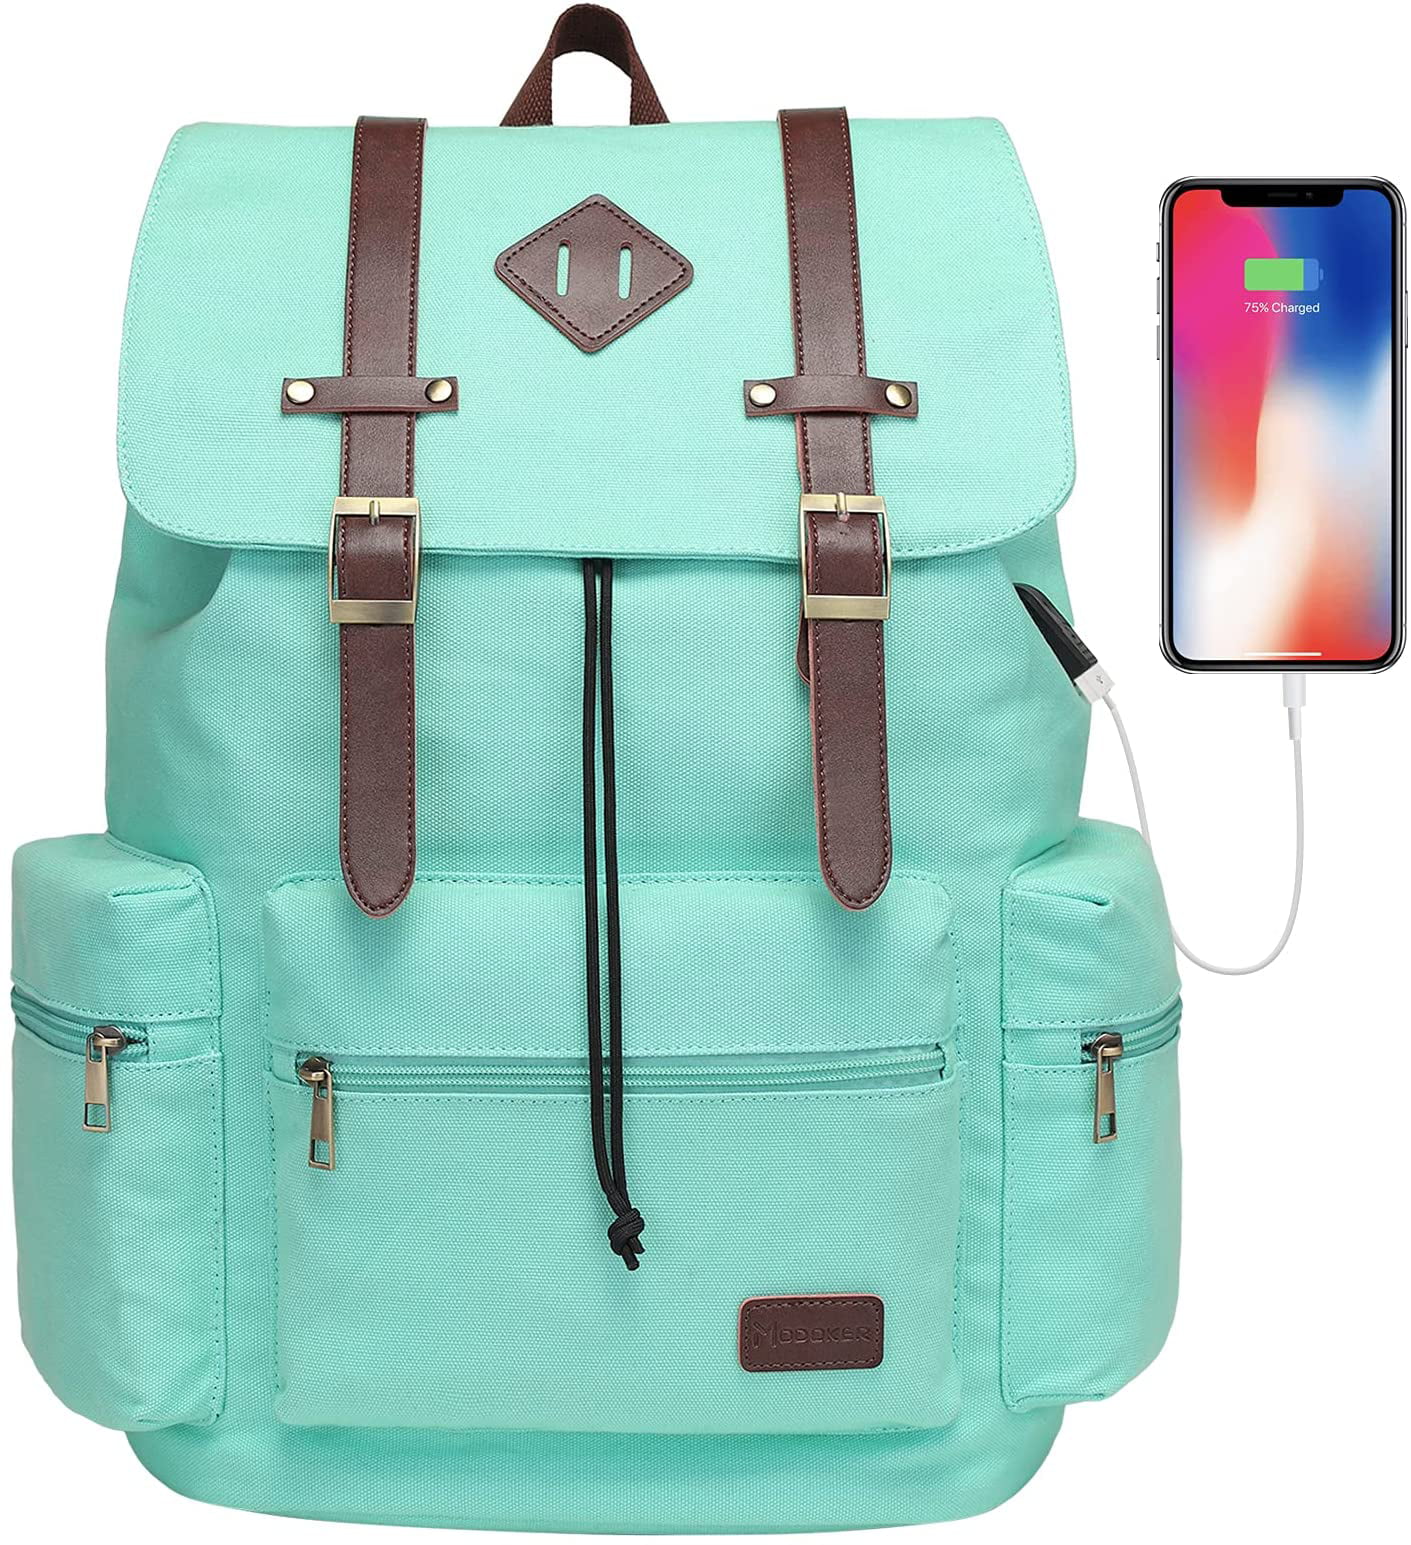 Pattern with Green Laptop Backpack 17 Inch Business Travel Backpacks School Backpacks Extra Large College School Bookbags with USB Charging Port for Travel Daypack